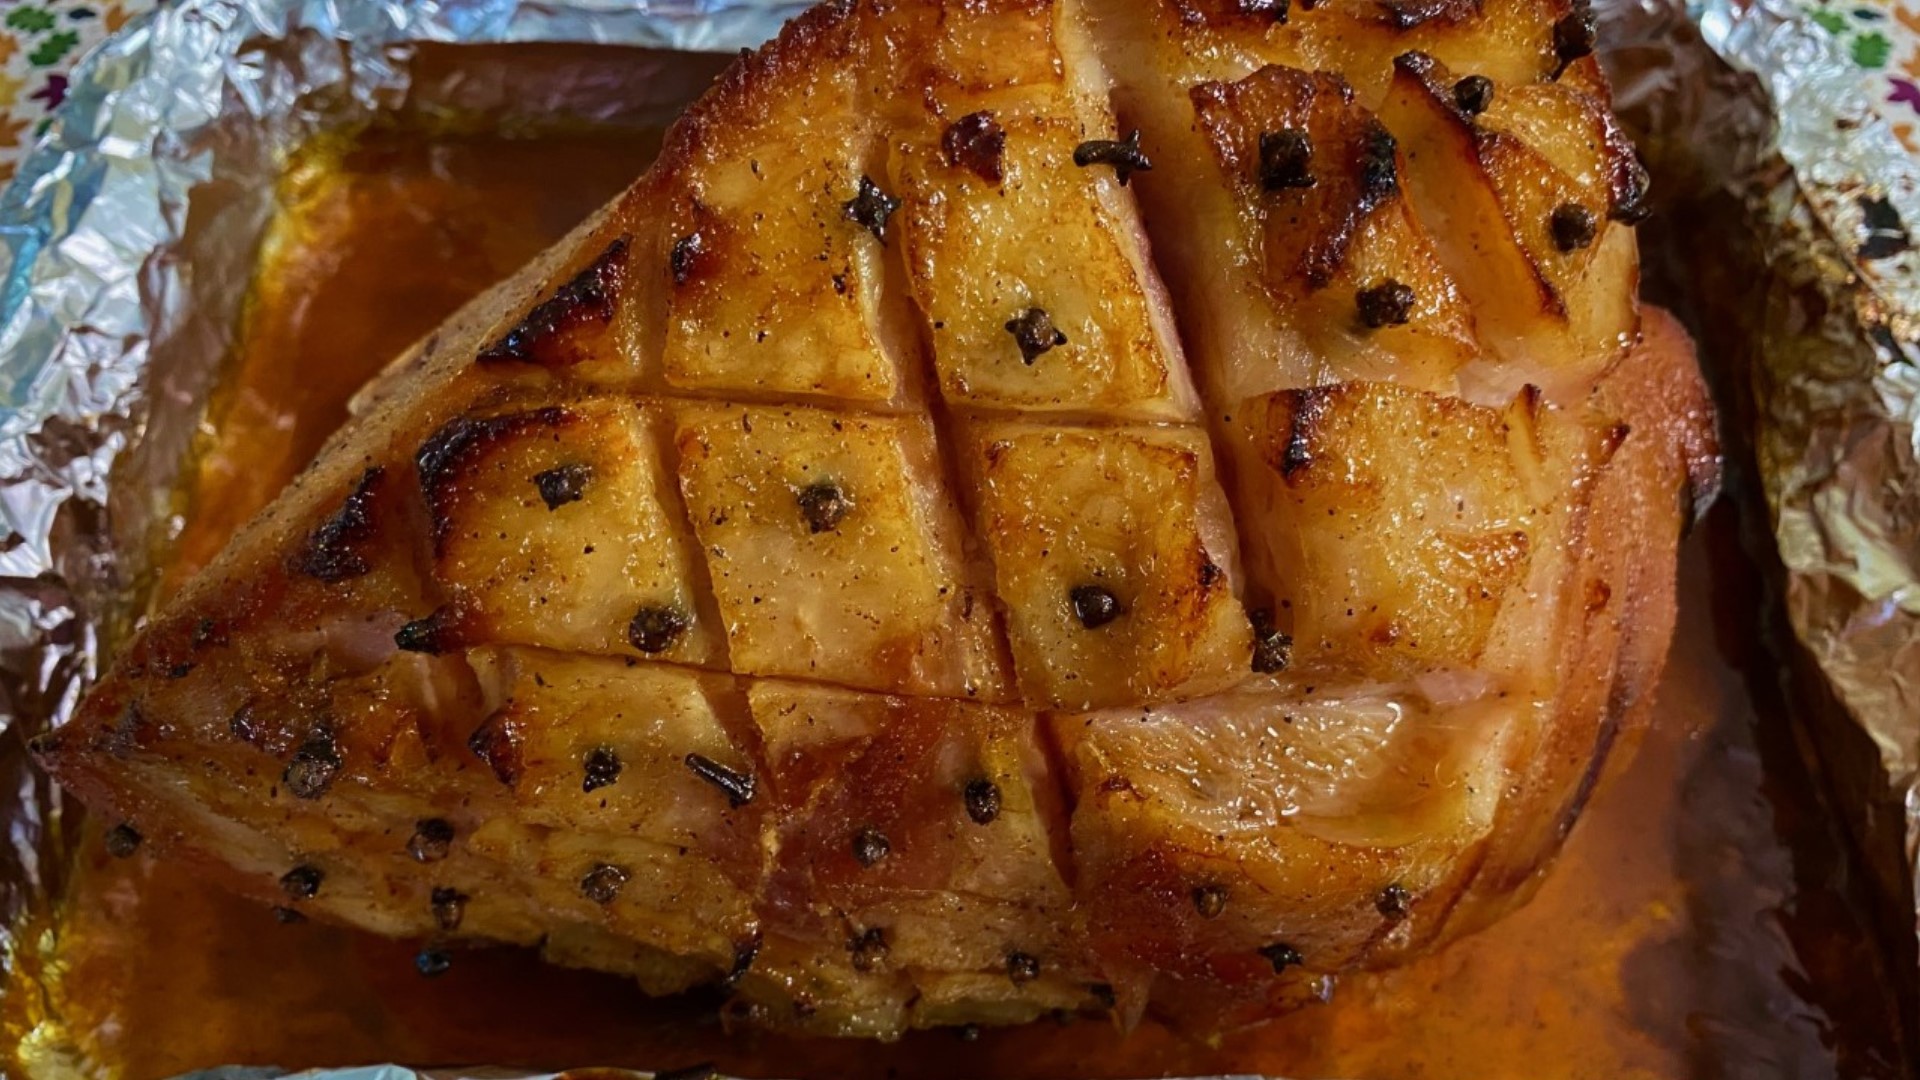 Chef Kevin shares a classic backed ham recipe just in time for Thanksgiving!